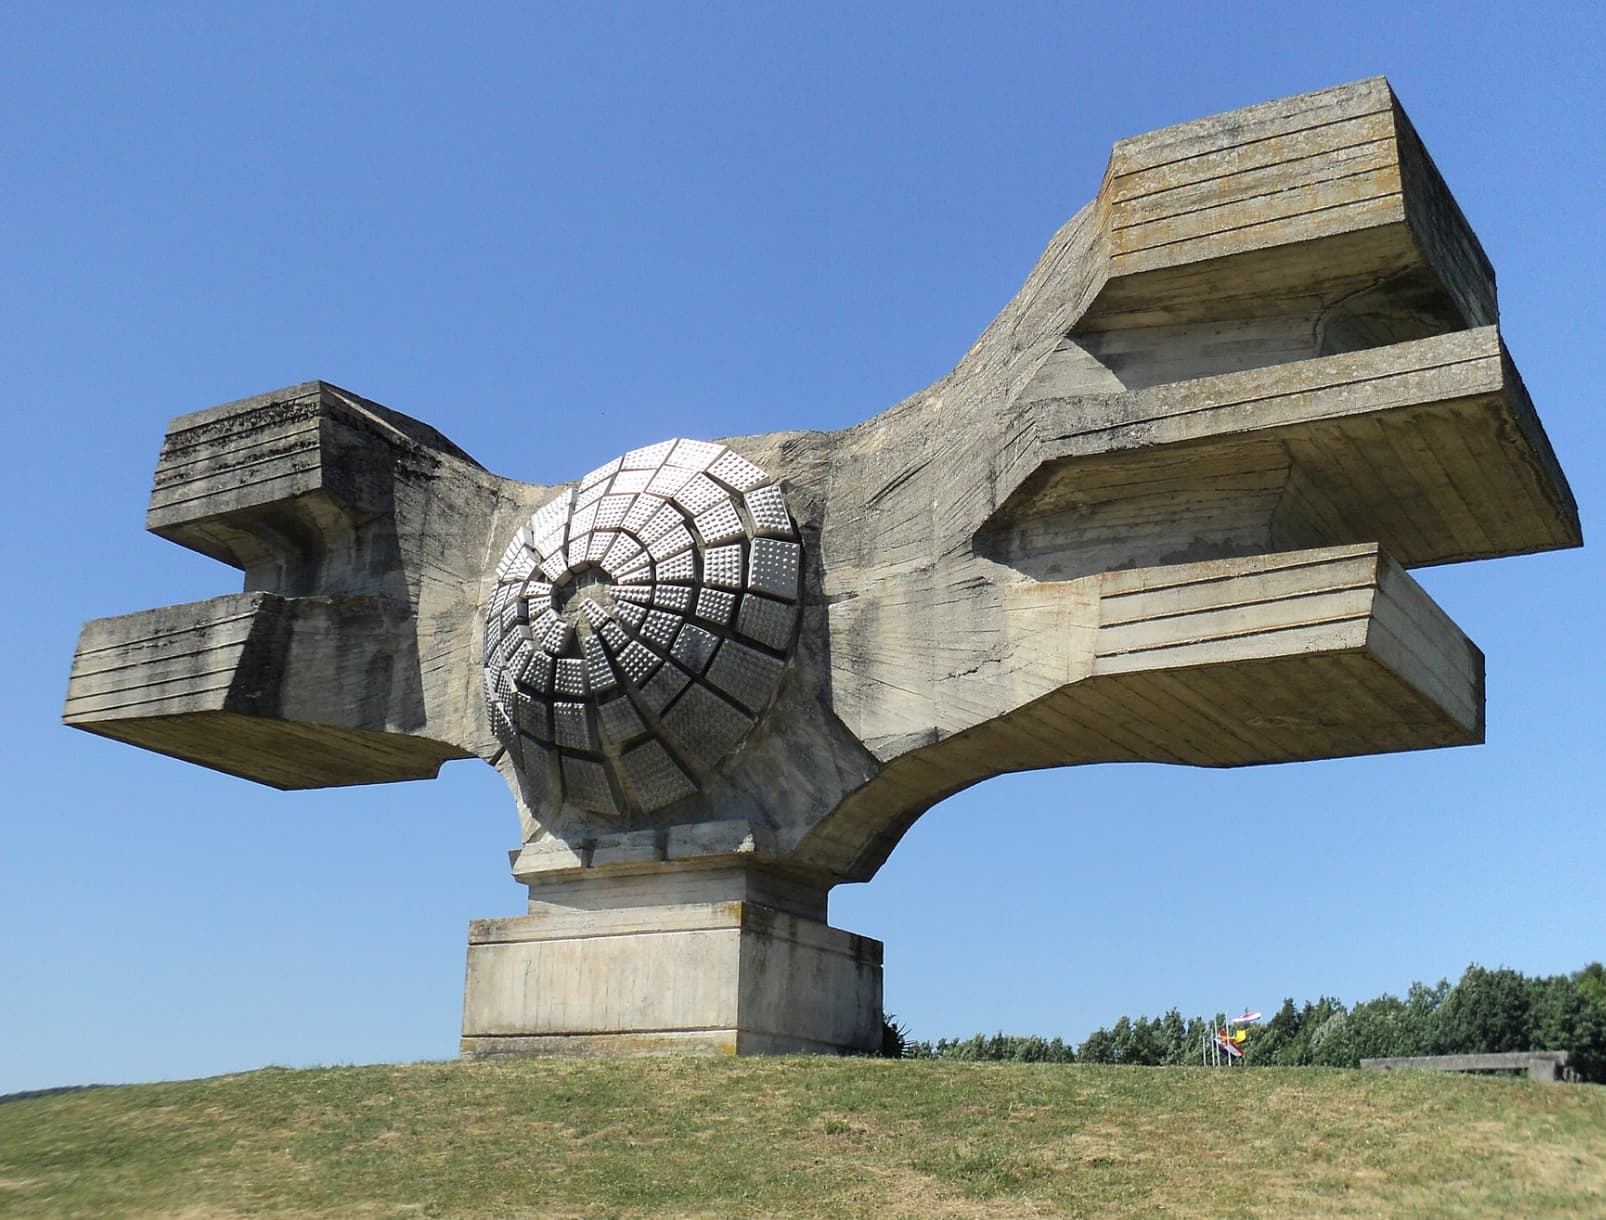 Though this World War II memorial sculpture was completed in 1967, one Redditor had an apt idea about renaming this ‘Star Wars’ -esque monument. “They should just call it what it is,” they wrote. “A contingency plan to escape earth during the apocalypse.”